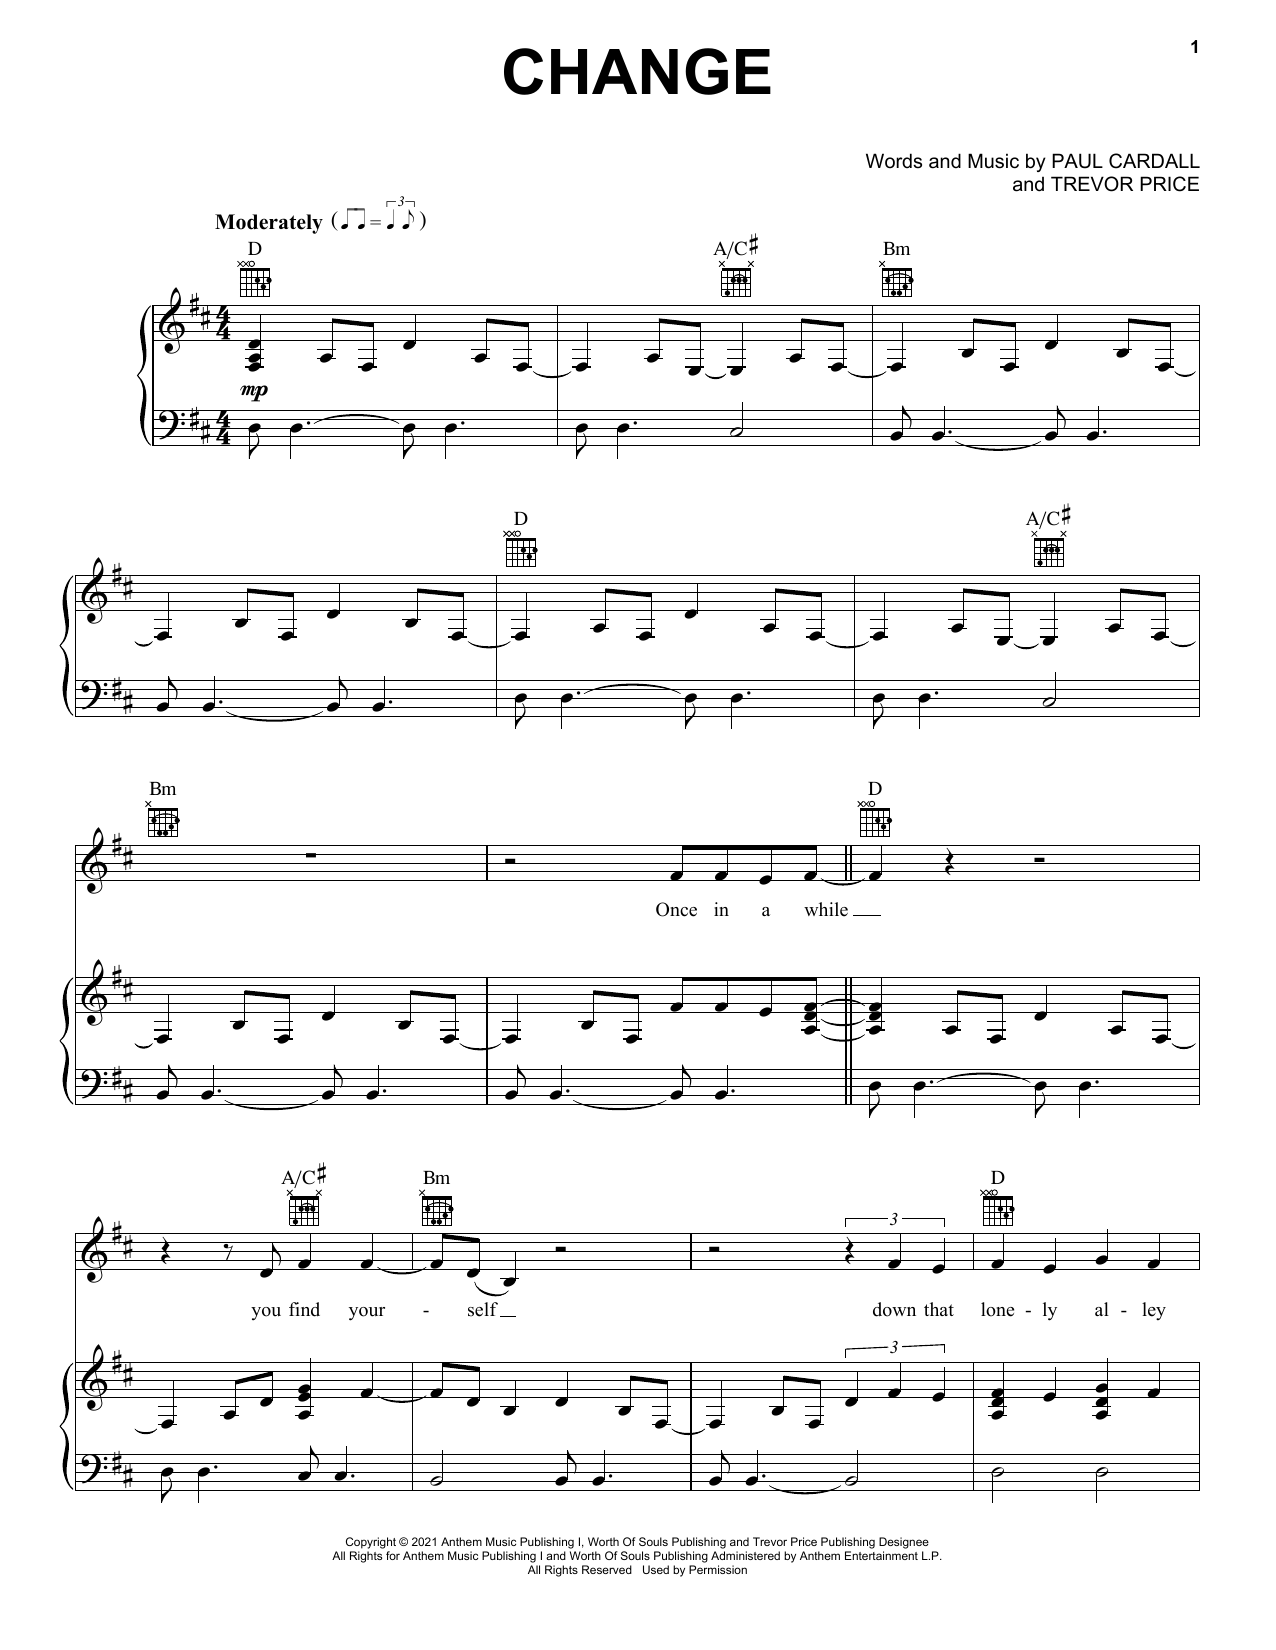 Download Paul Cardall and Trevor Price Change Sheet Music